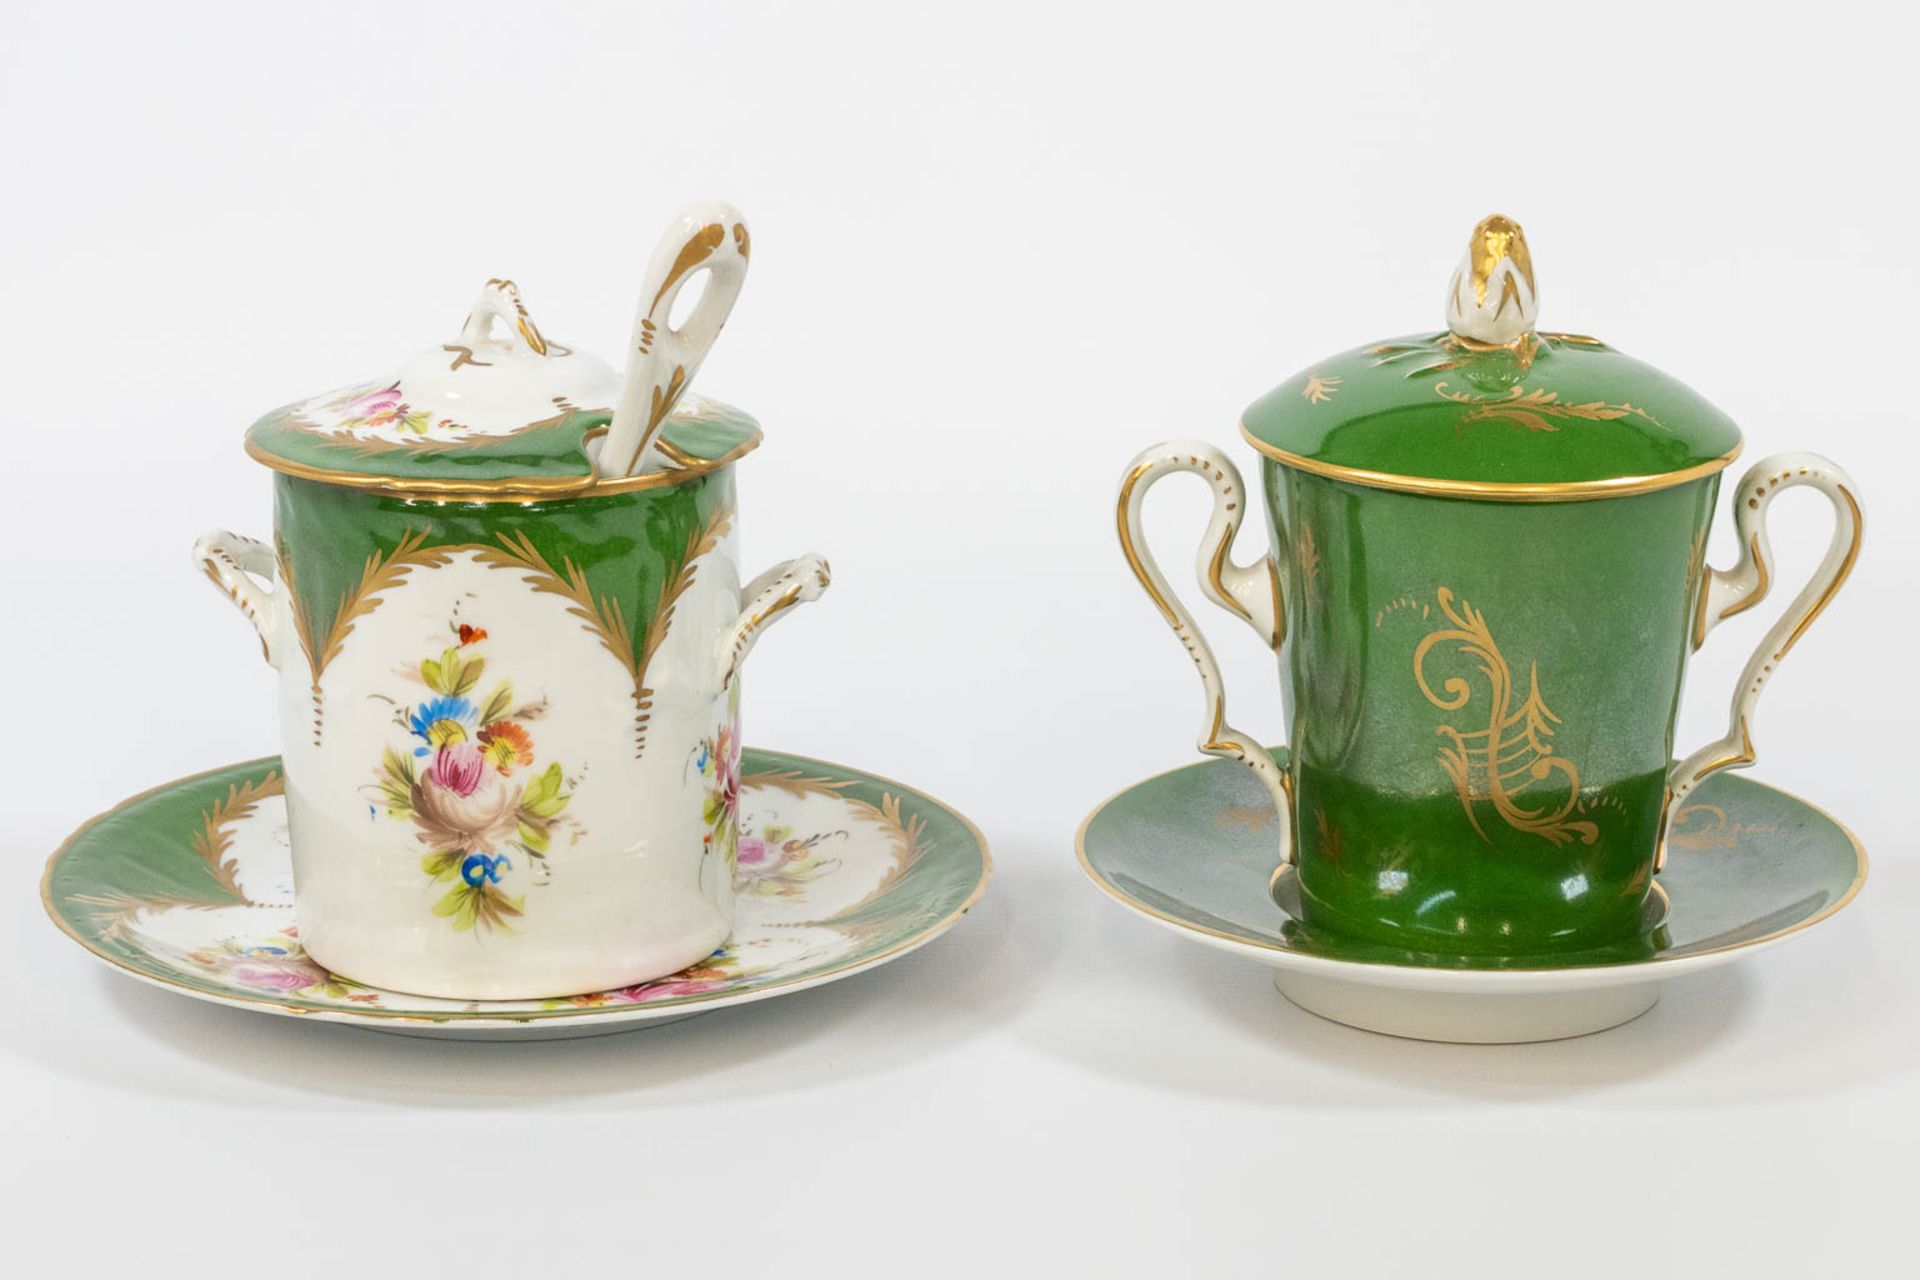 A tremble cup and sugarpot, made of hand-painted porcelain with a flower decor and marked JD Limoges - Image 11 of 11